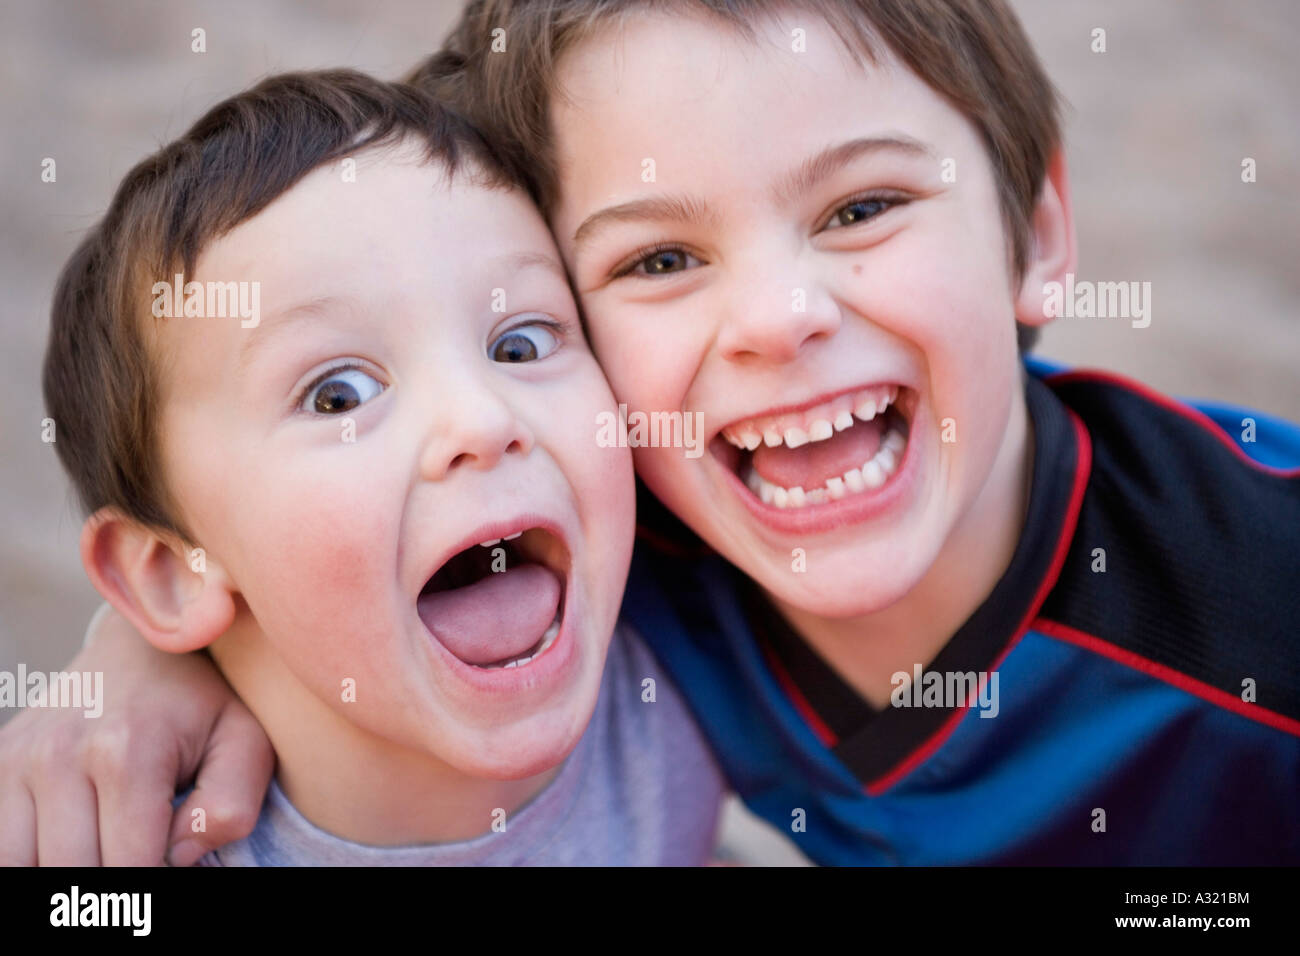 Brothers standing together and laughing Stock Photo